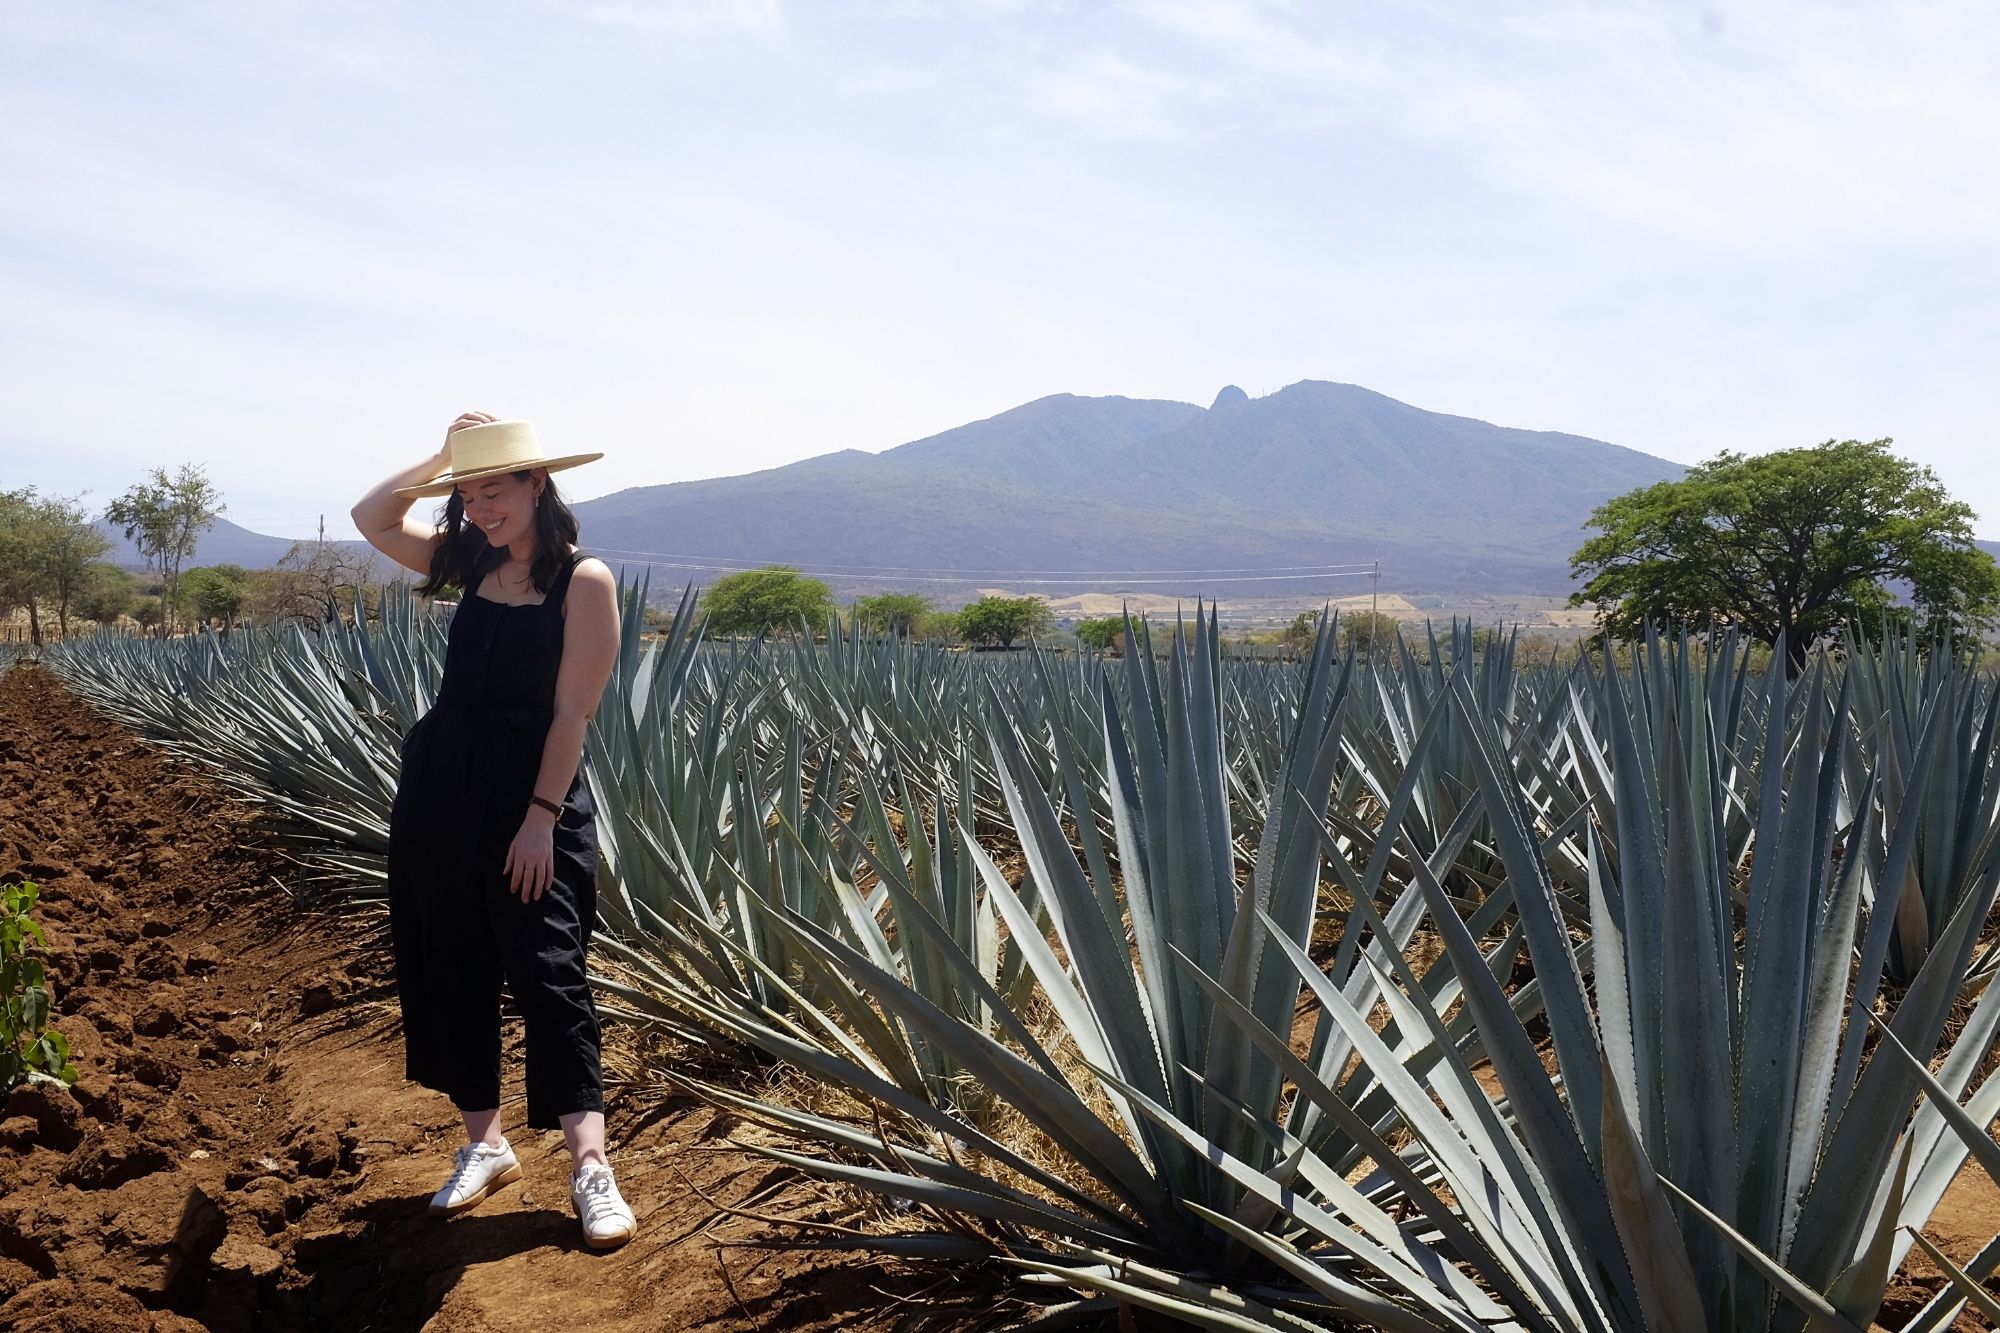 Alyssa wears a black jumpsuit and is standing in a field of agave